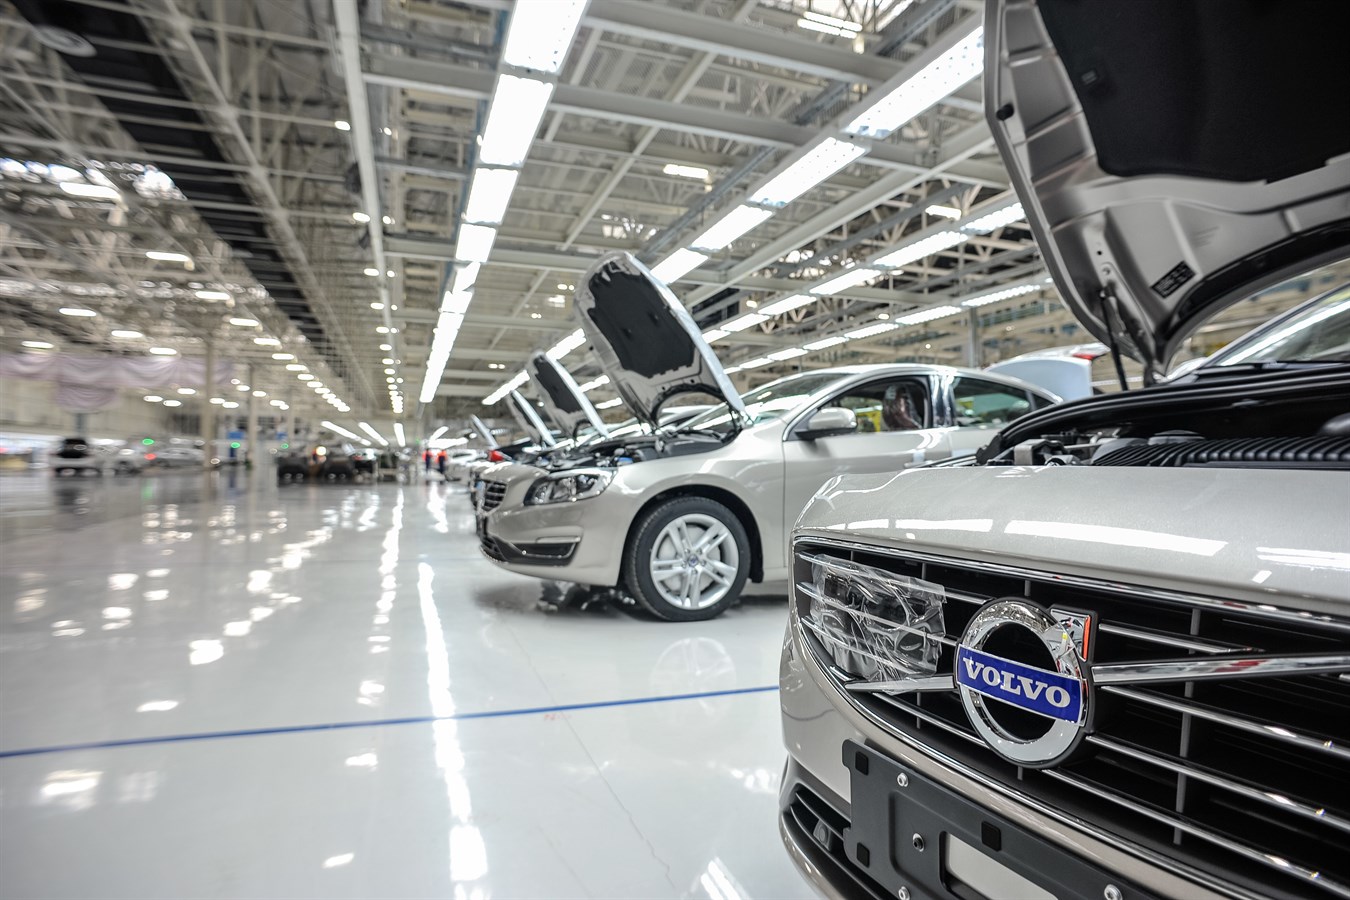 Production of the Volvo S60L